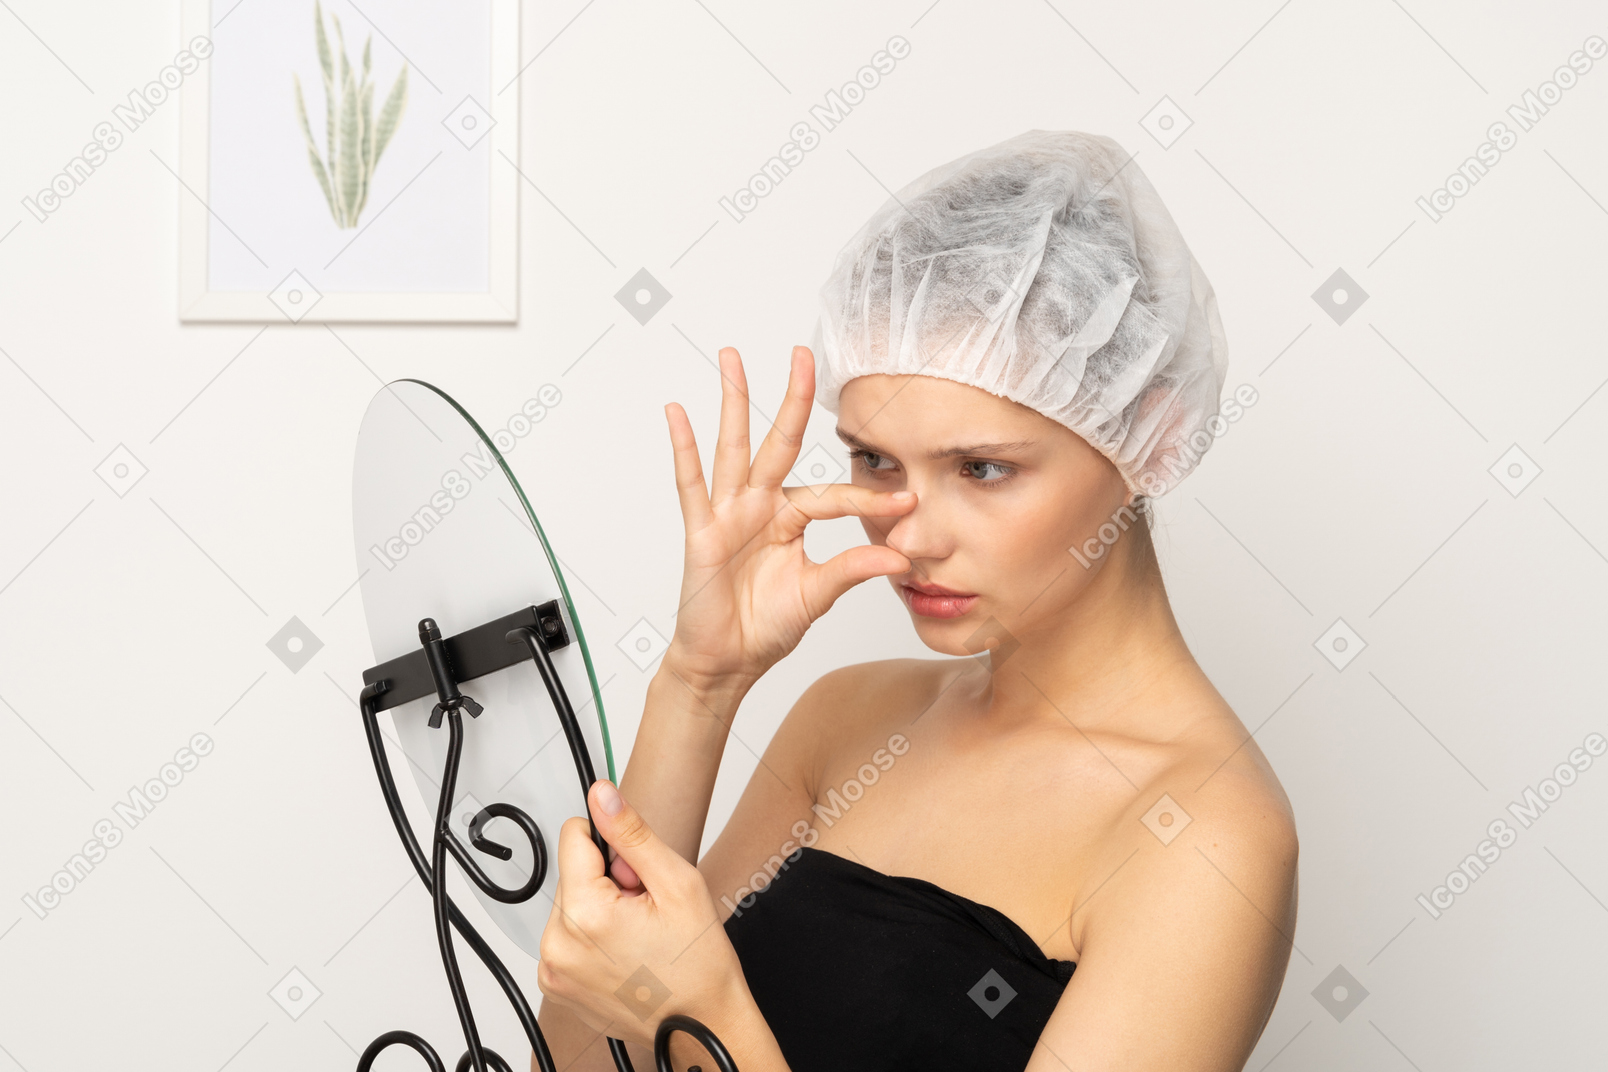 Unhappy young woman in medical cap looking in the mirror and touching her nose